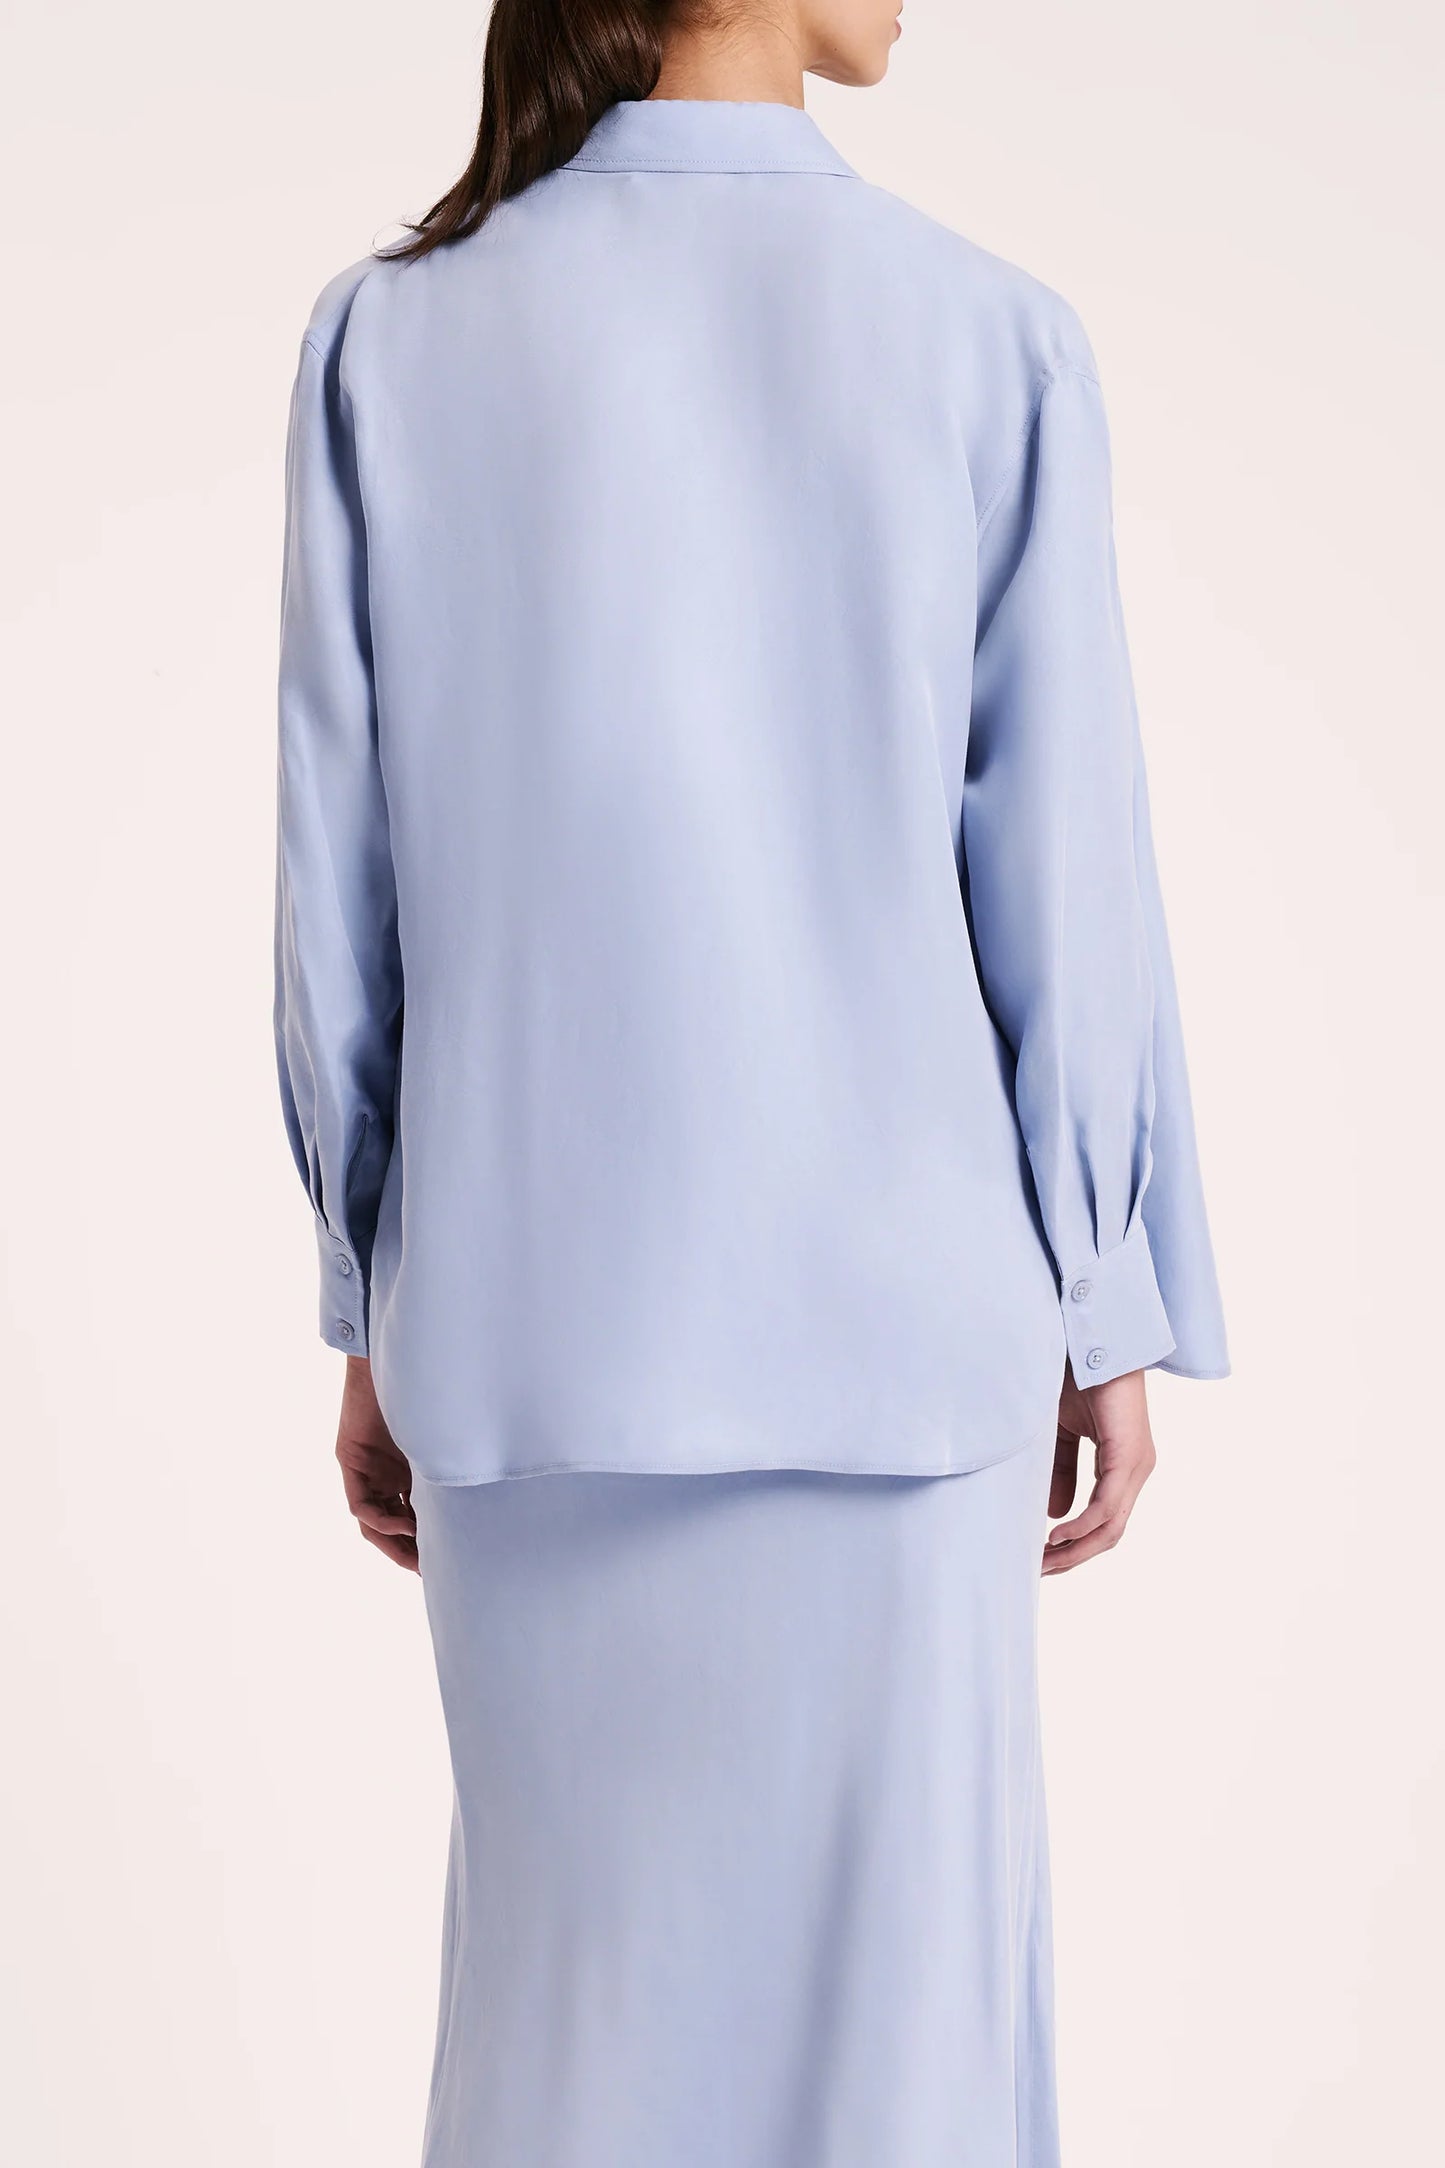 Nude Lucy RIKA CUPRO SHIRT- Mineral Blue